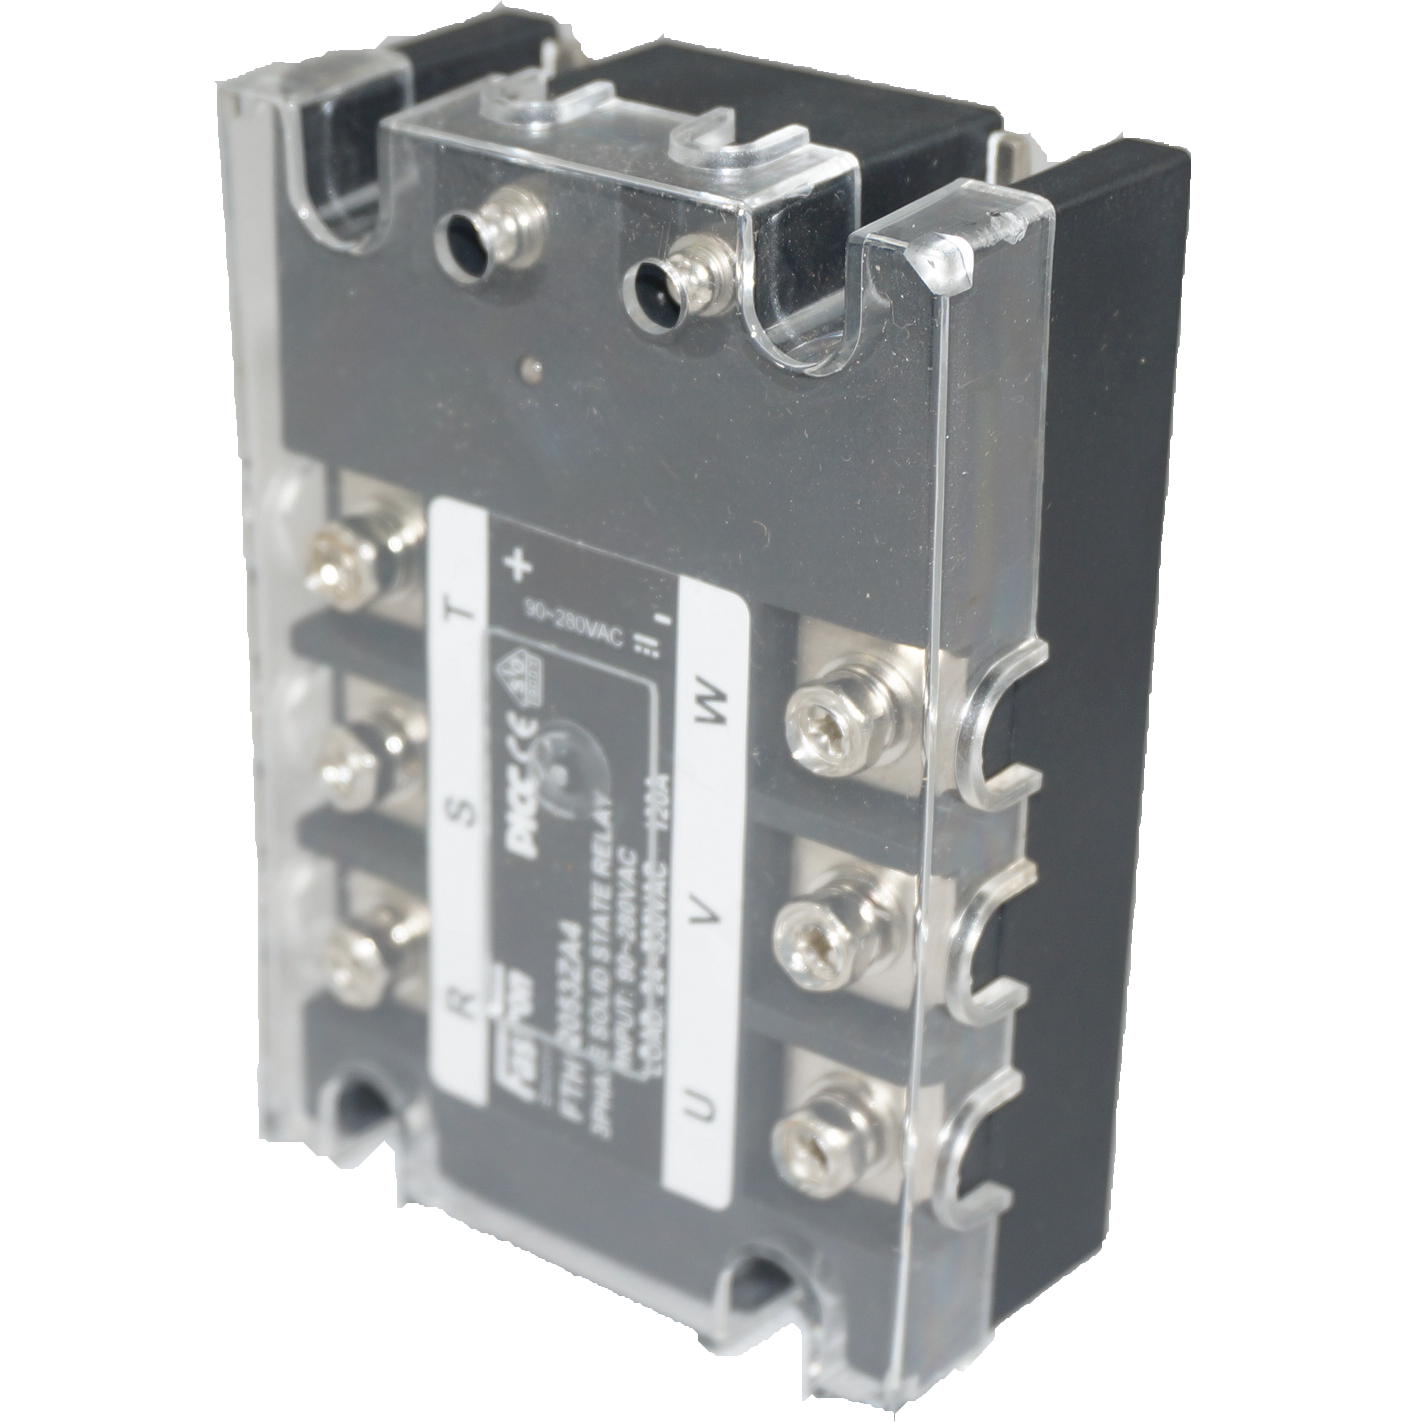 FTH12053ZA4, Solid State Relay, 3 Phase 90-280VAC Control, 120A, 70-530VAC Load, with IP20 Cover